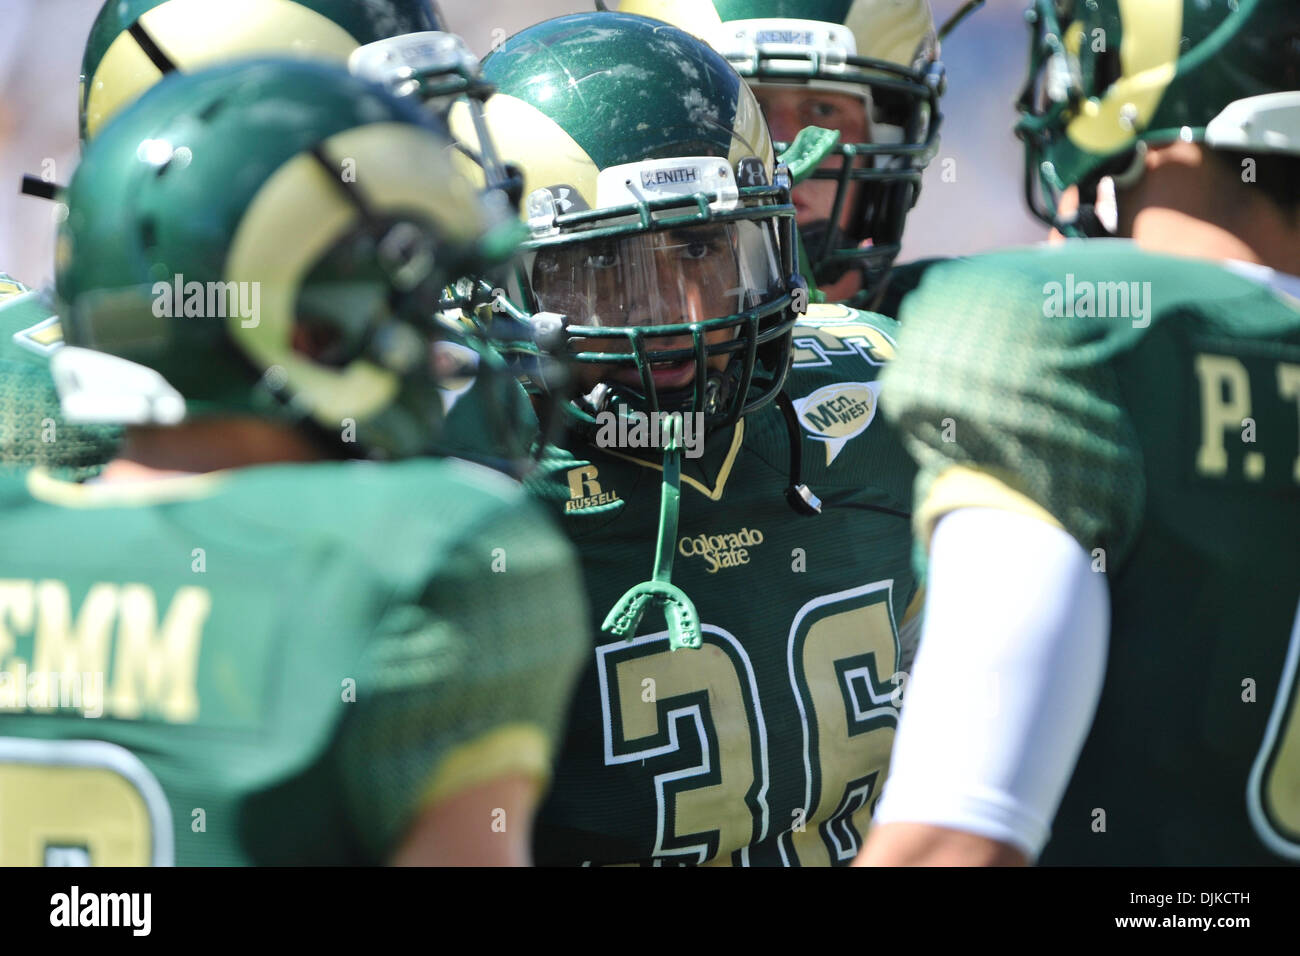 Sep. 04, 2010 - Denver, Colorado, United States of America - Colorado State Rams full back  Zac Pauga (36) in the huddle during Rocky Mountain Showdown game between the Colorado State Rams and the Colorado Buffaloes at Invesco Field at Mile High. Colorado defeated Colorado State by a score of 24-3. (Credit Image: © Andrew Fielding/Southcreek Global/ZUMApress.com) Stock Photo